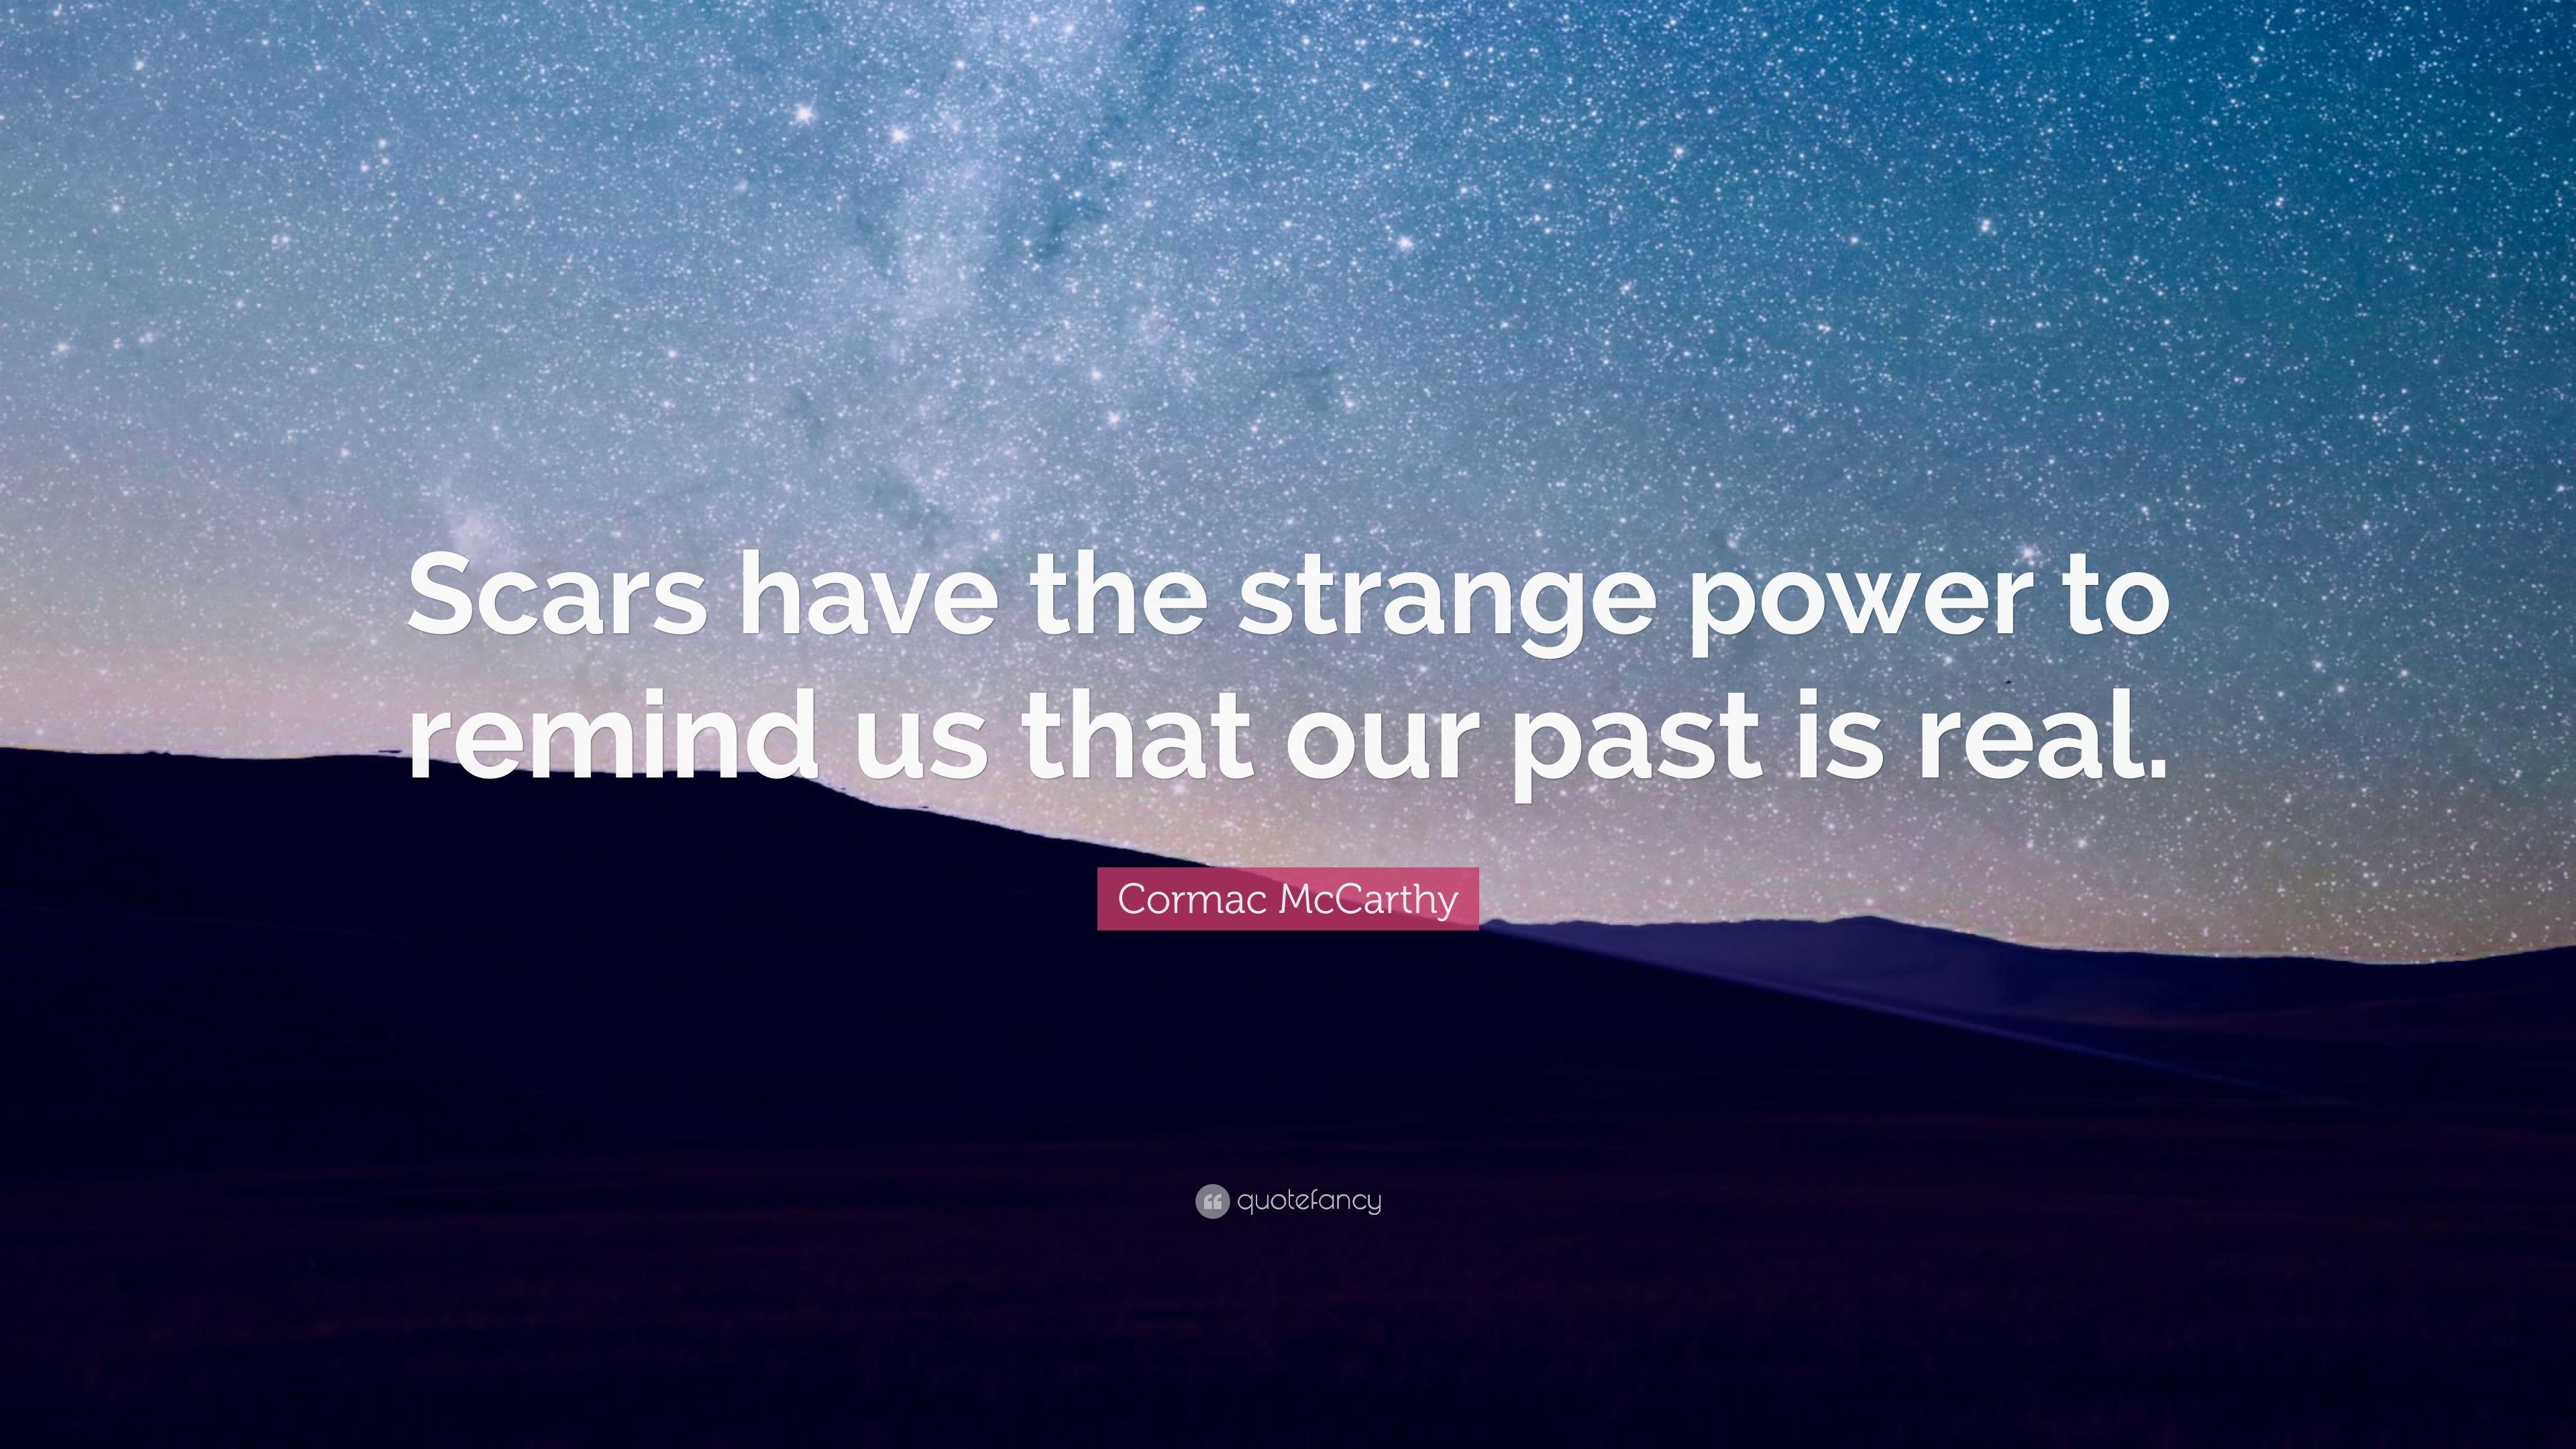 Cormac McCarthy Quote: “Scars have the strange power to remind us